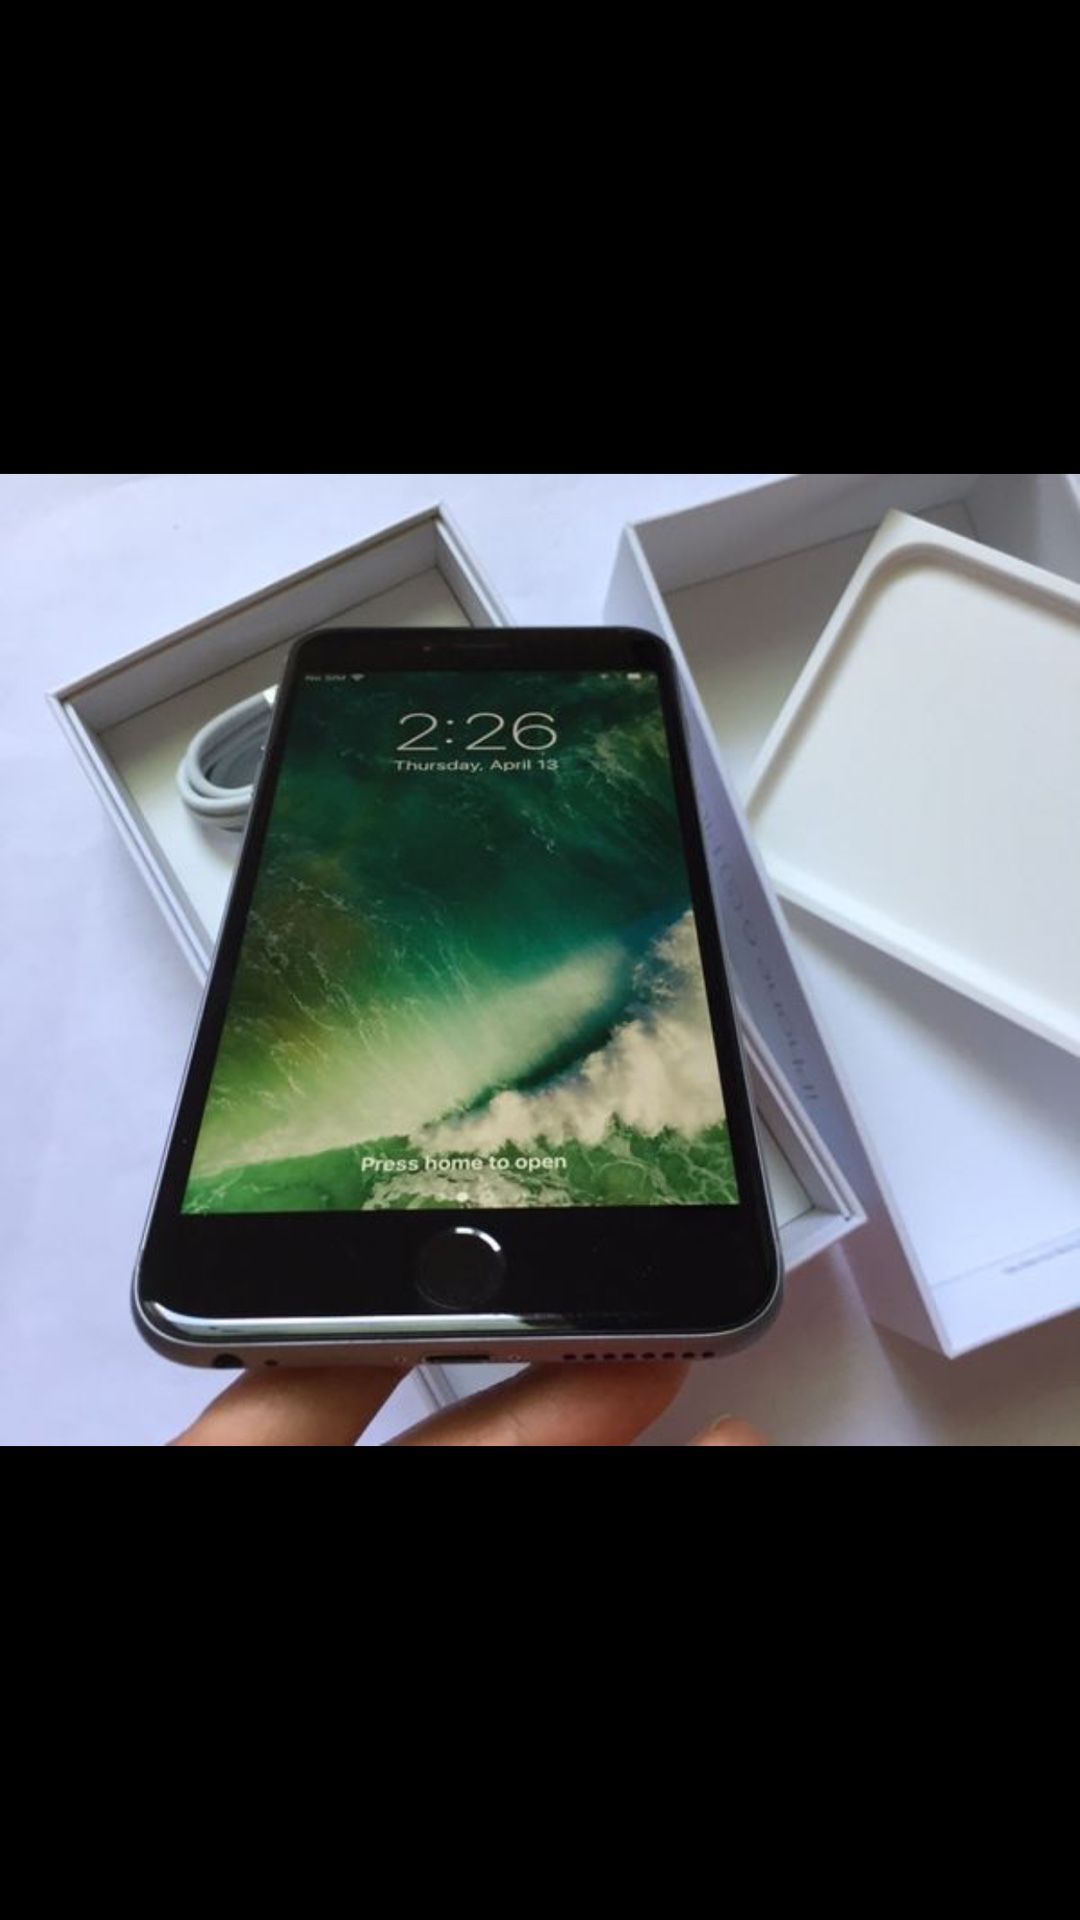 iPhone 6 Plus 16GB excellent condition factory Unlocked